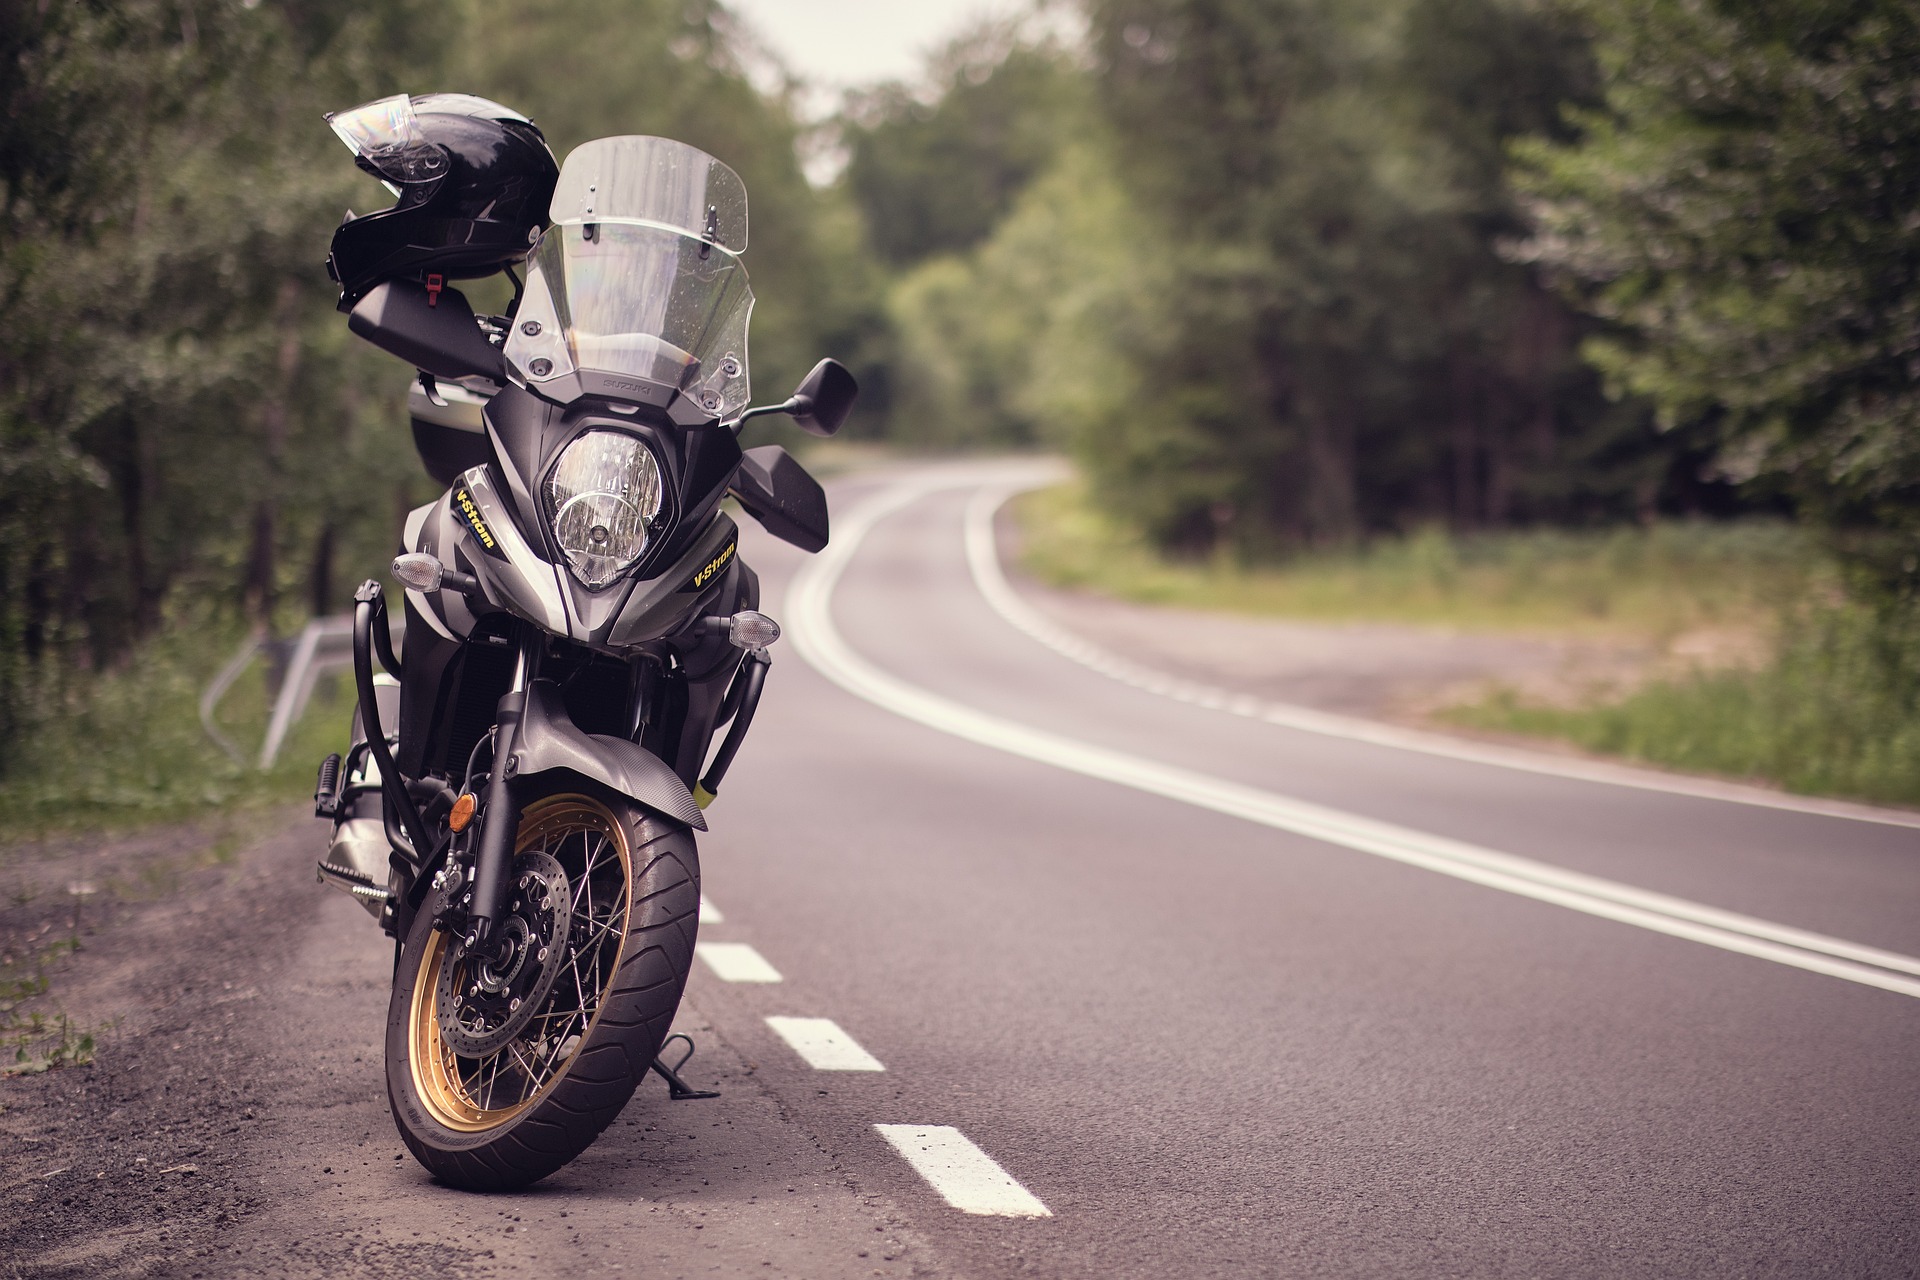 A Motorbike parked on the side of an empty road, which runs through a forest.  Our No Win No Fee Solicitors can assist you with making an injury compensation claim if you suffer injuries as a motorbike user through no fault of your own.